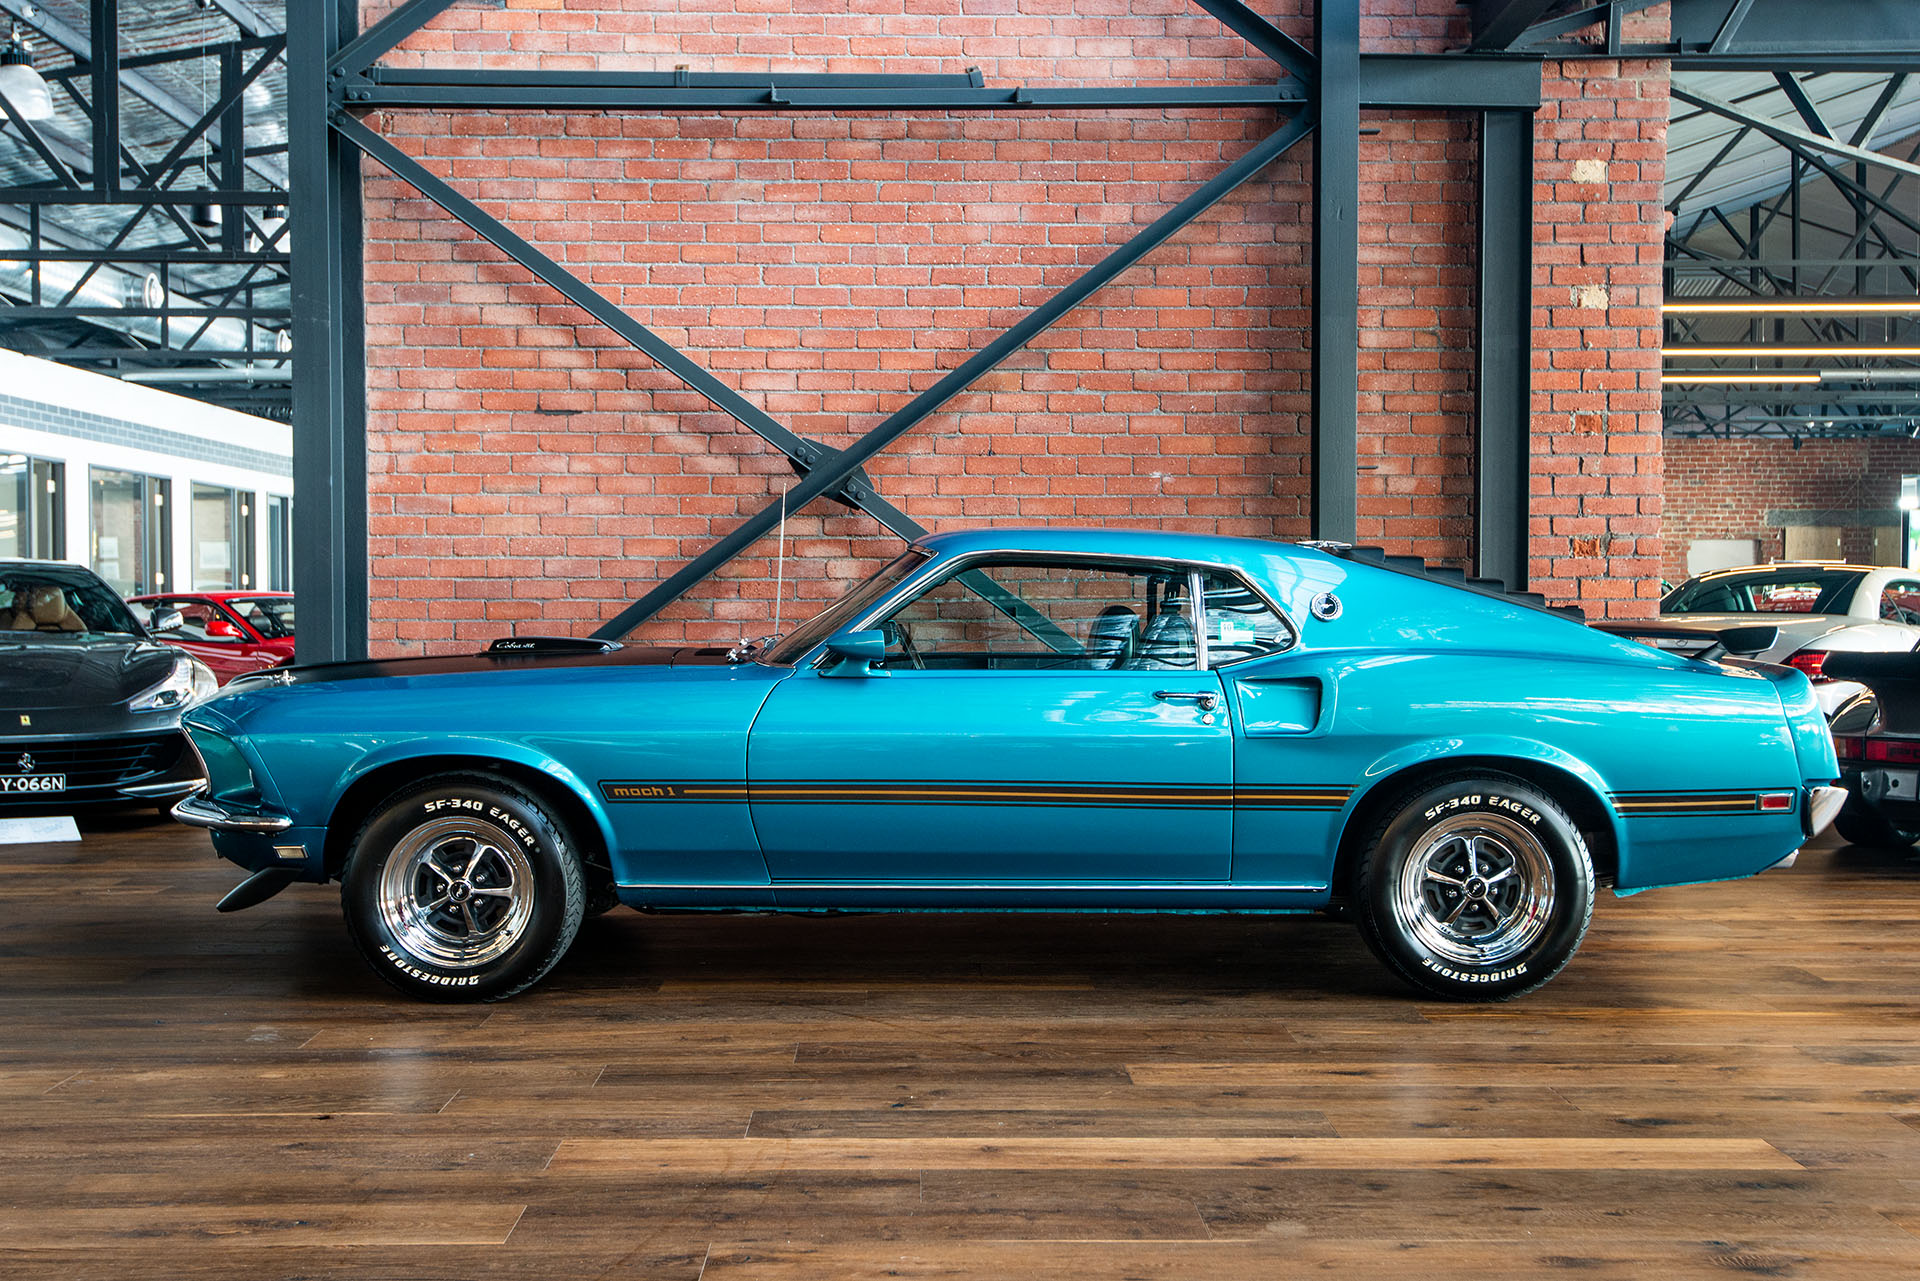 1969 Ford Mustang Mach 1 428 Cobra Jet - Richmonds - Classic and